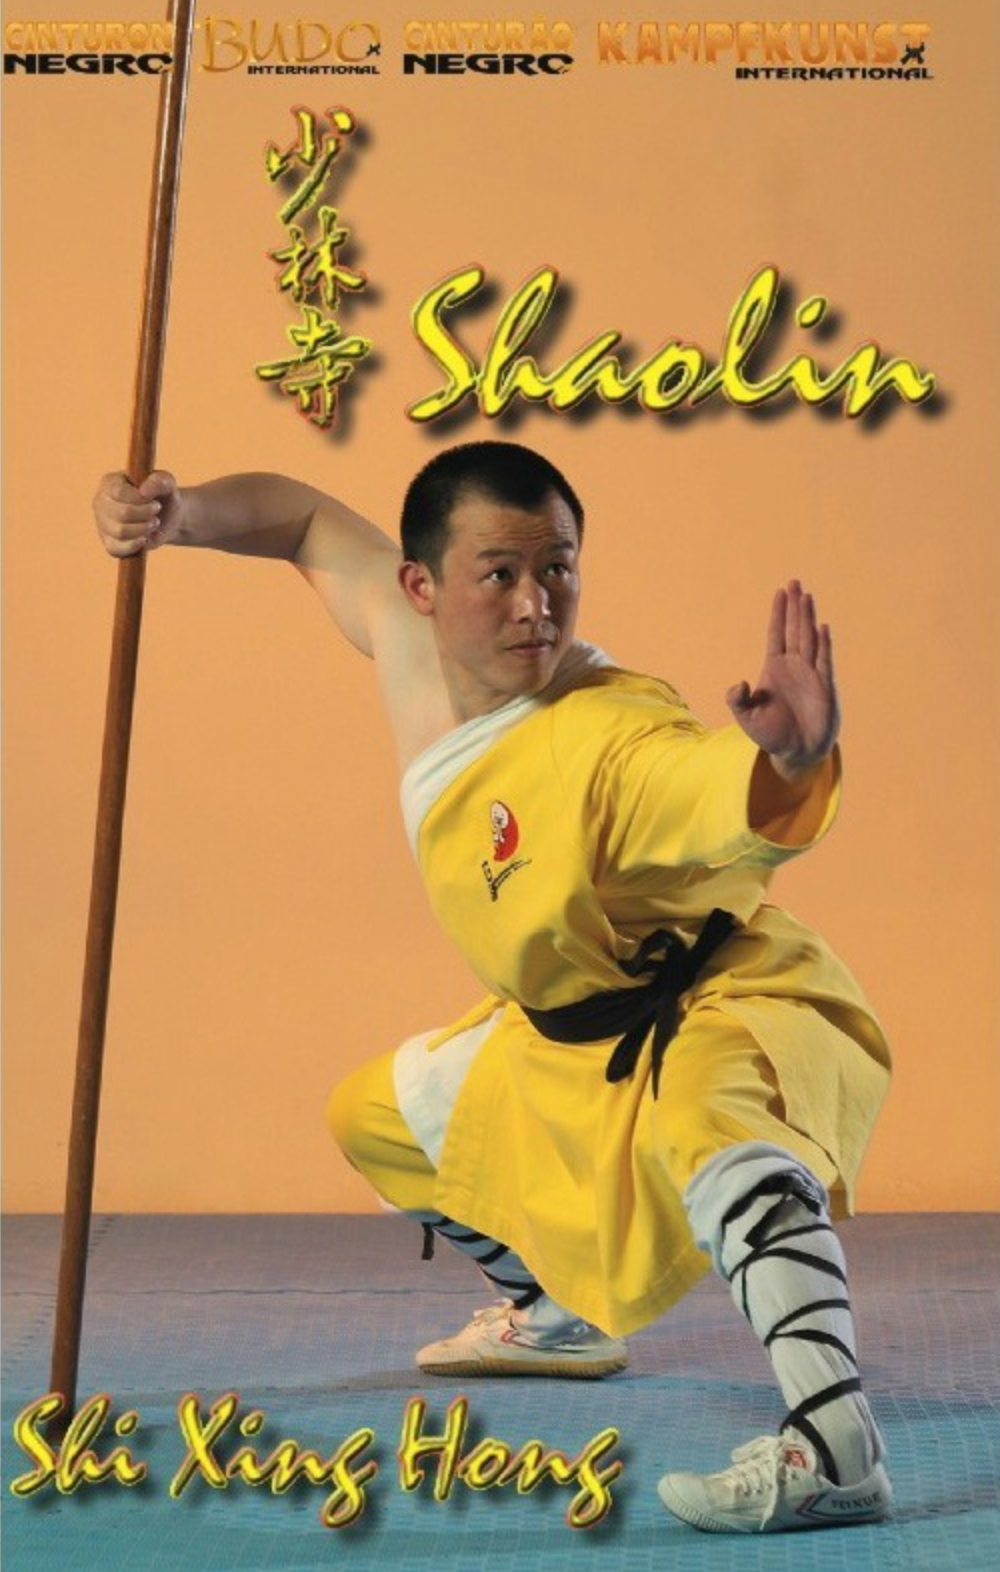 The 18 movements of Shaolin Kung Fu DVD with Shi Xing Hong - Budovideos Inc